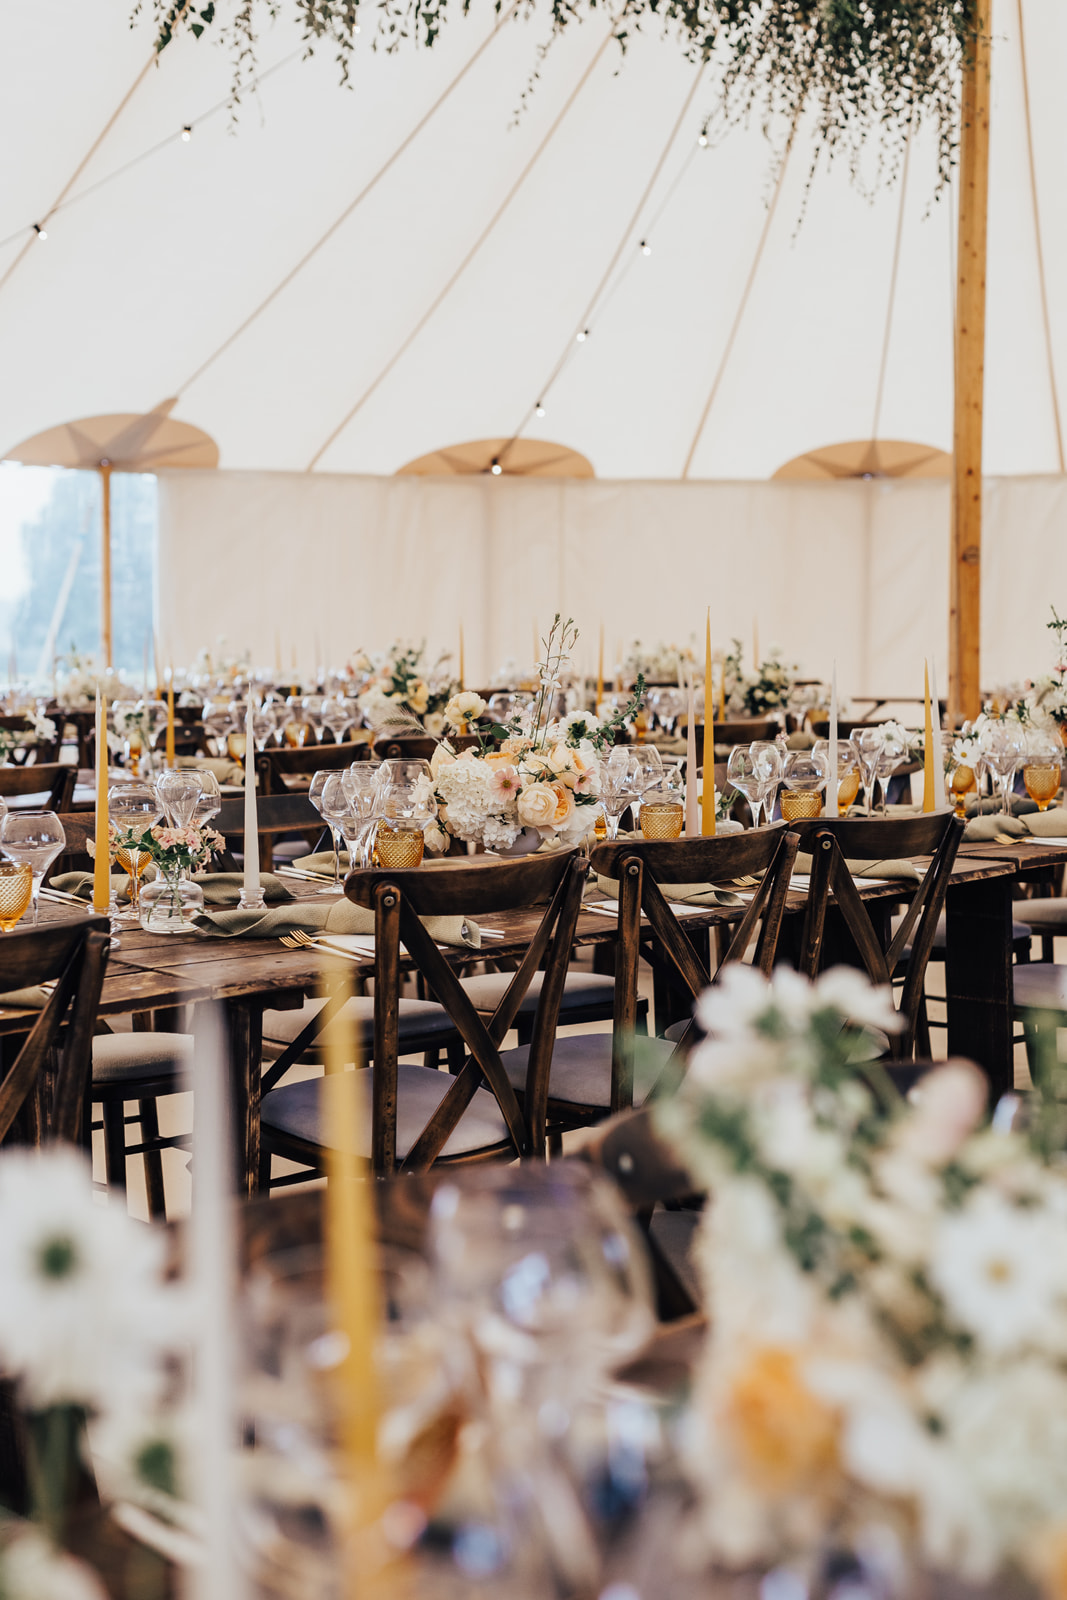 Lora & Dave's Garden Sperry Tent Wedding dining details, by Natalie Hewitt & Joseph Benjamin Marquees Images by Rebecca Carpenter Photography